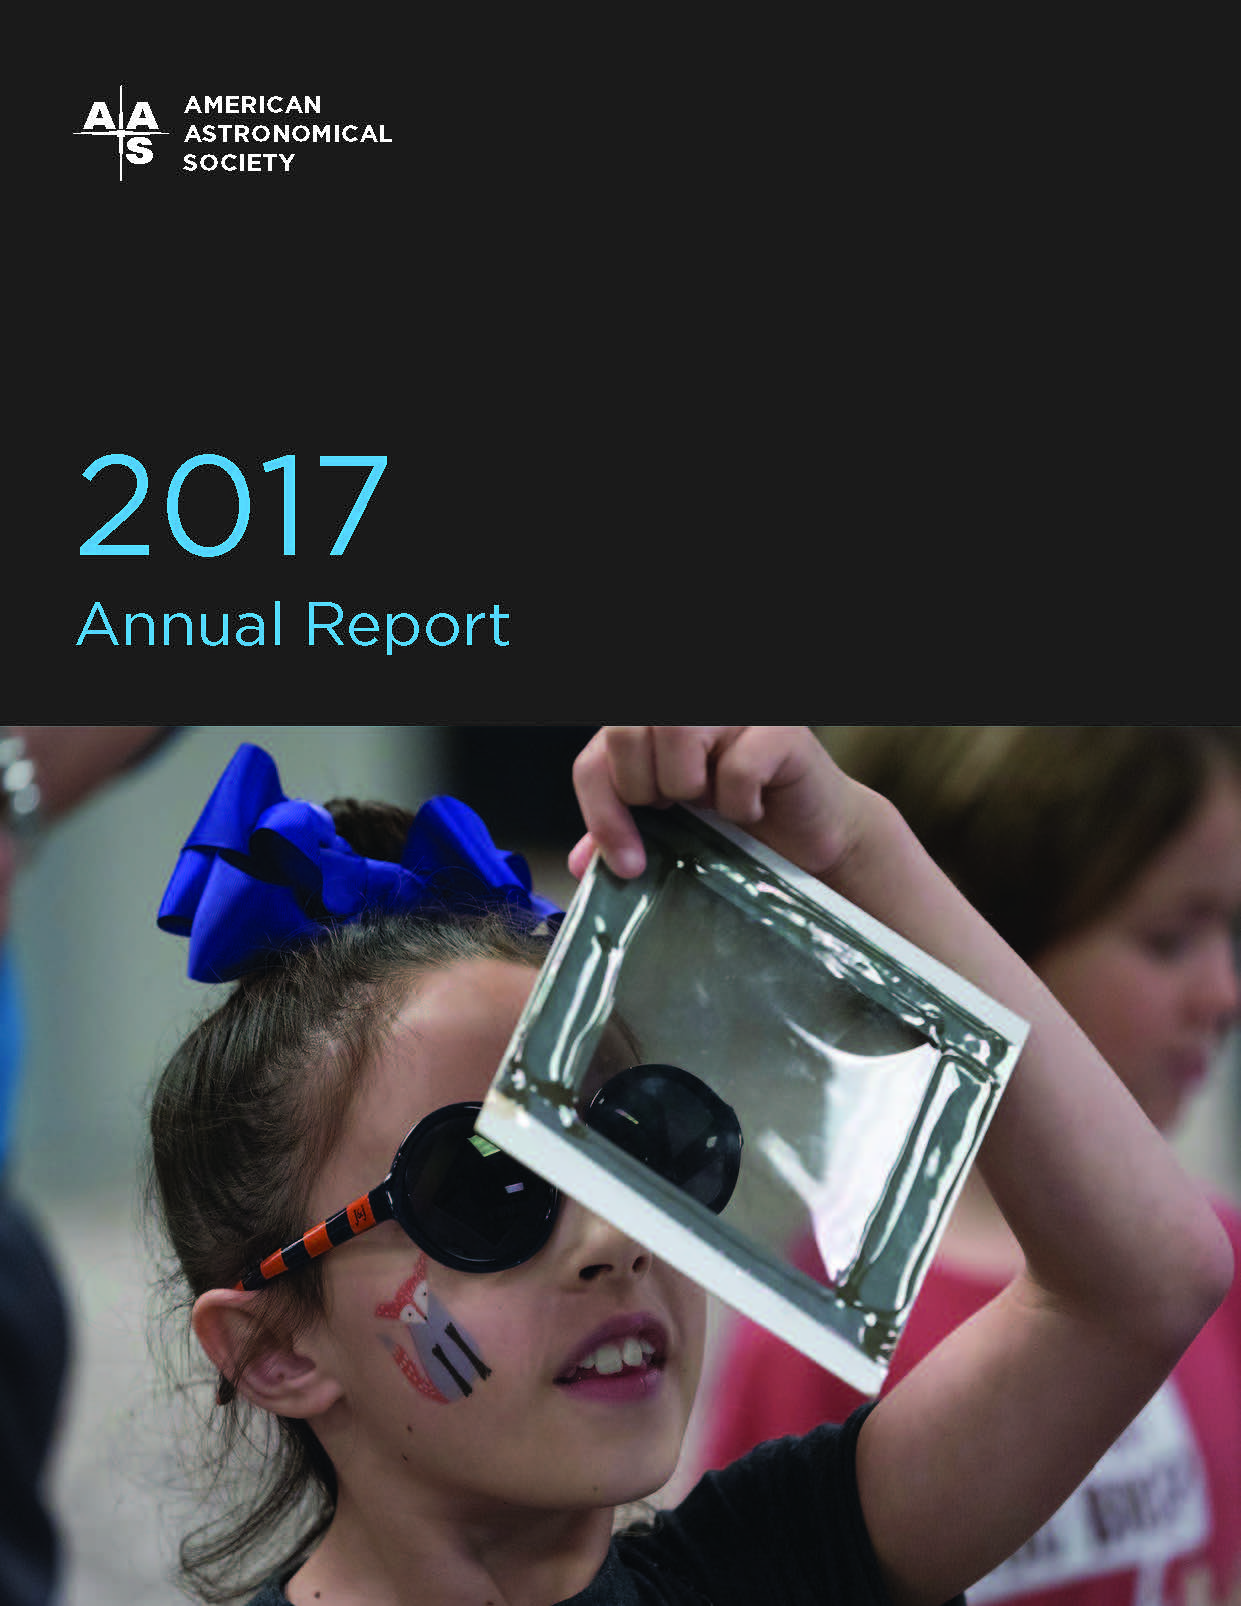 AAS 2017 Annual Report